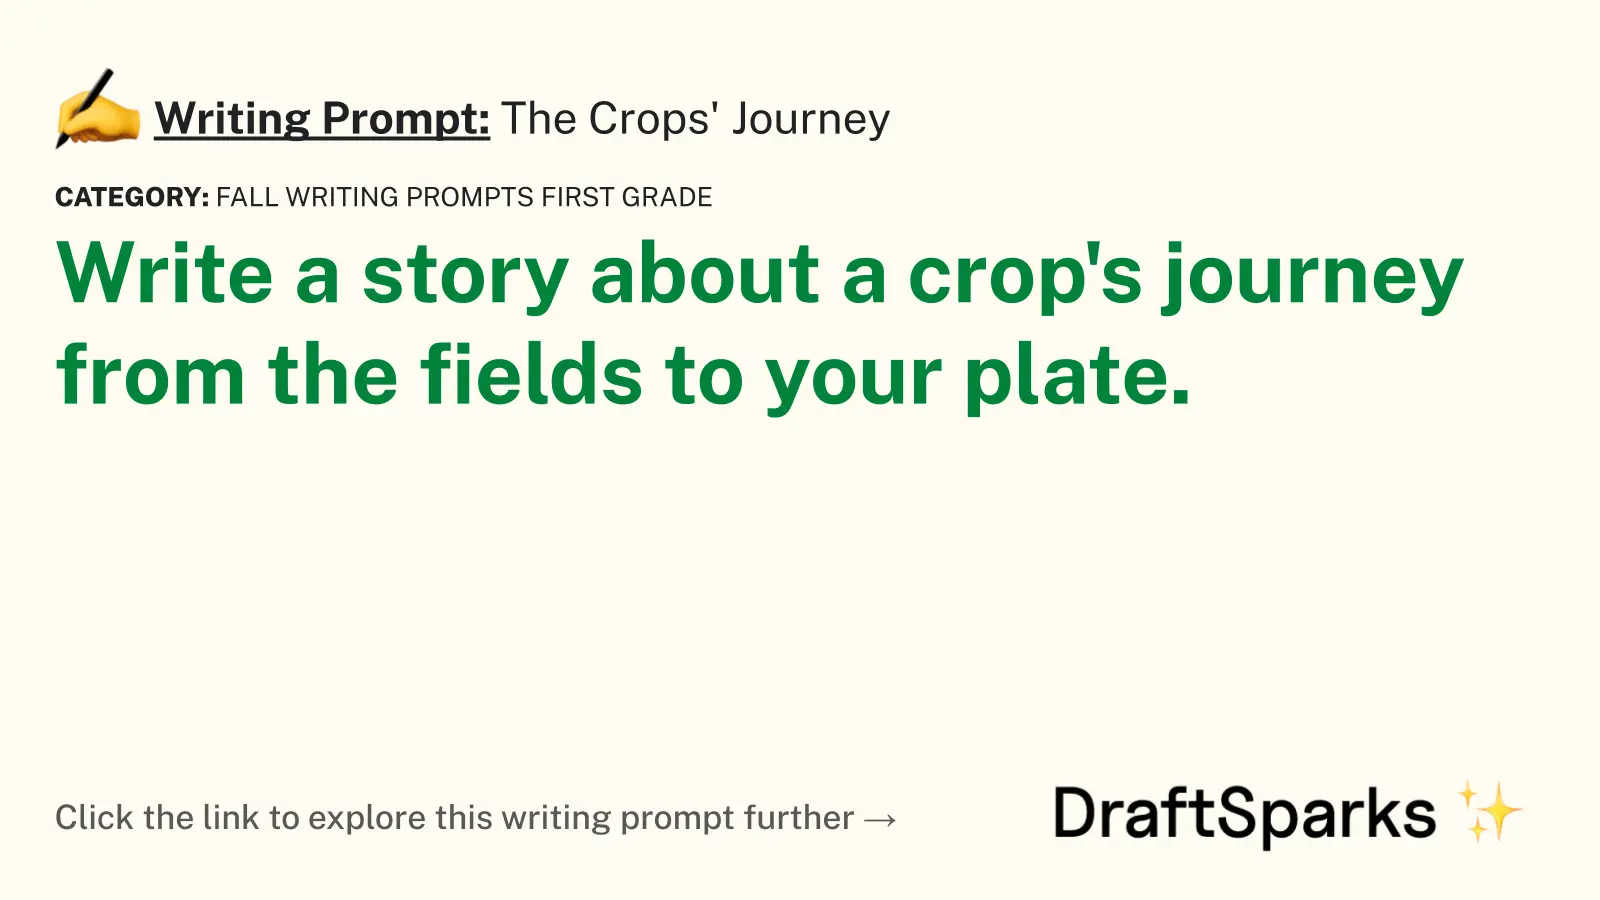 The Crops’ Journey